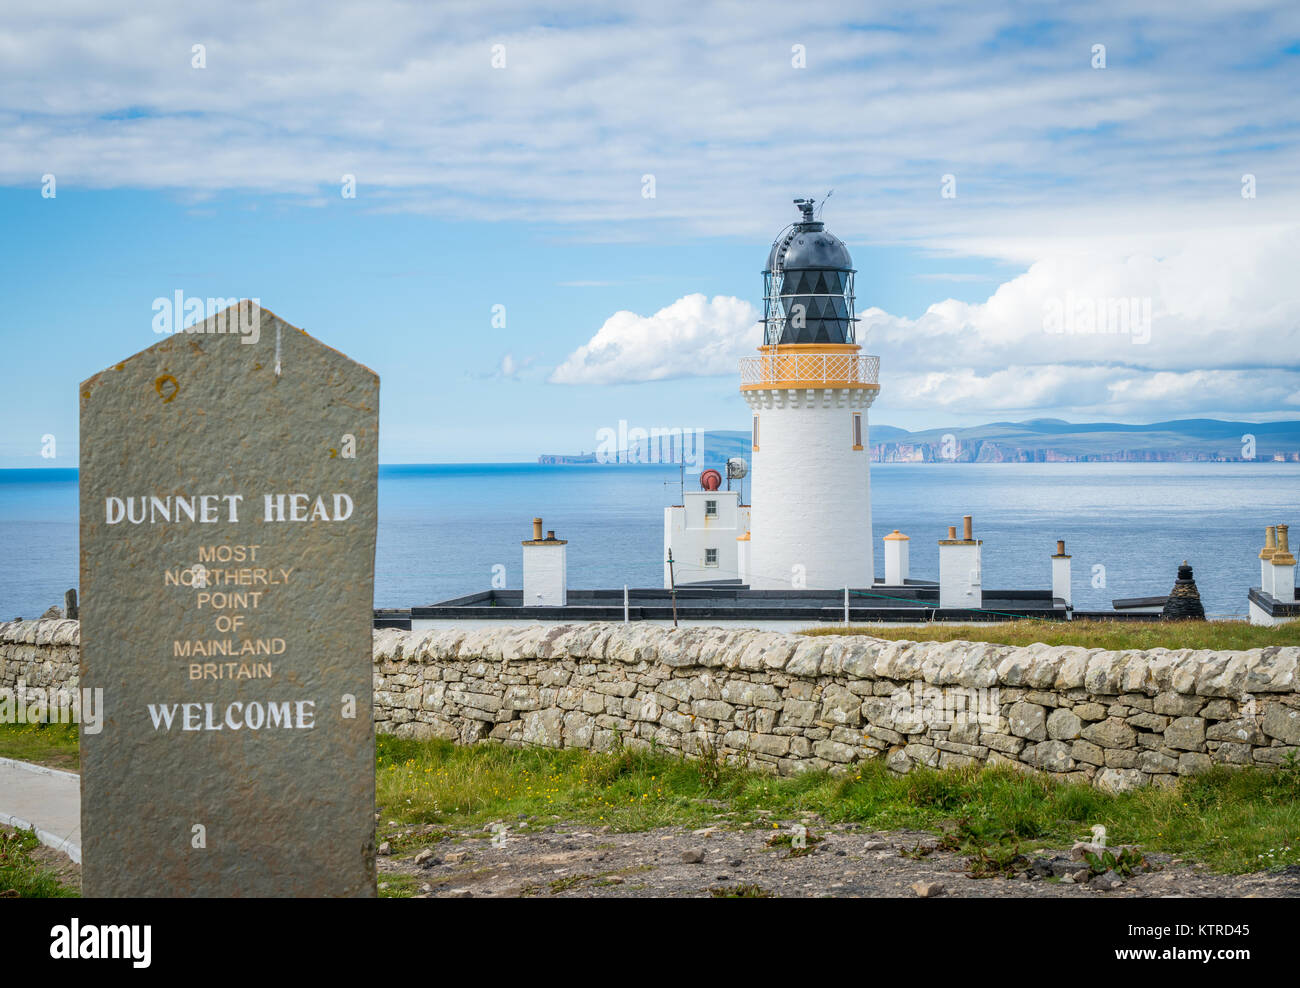 Dunnet Head Lighthouse, in Caithness, on the north coast of Scotland, the most northerly point of the mainland of Great Britain. Stock Photo